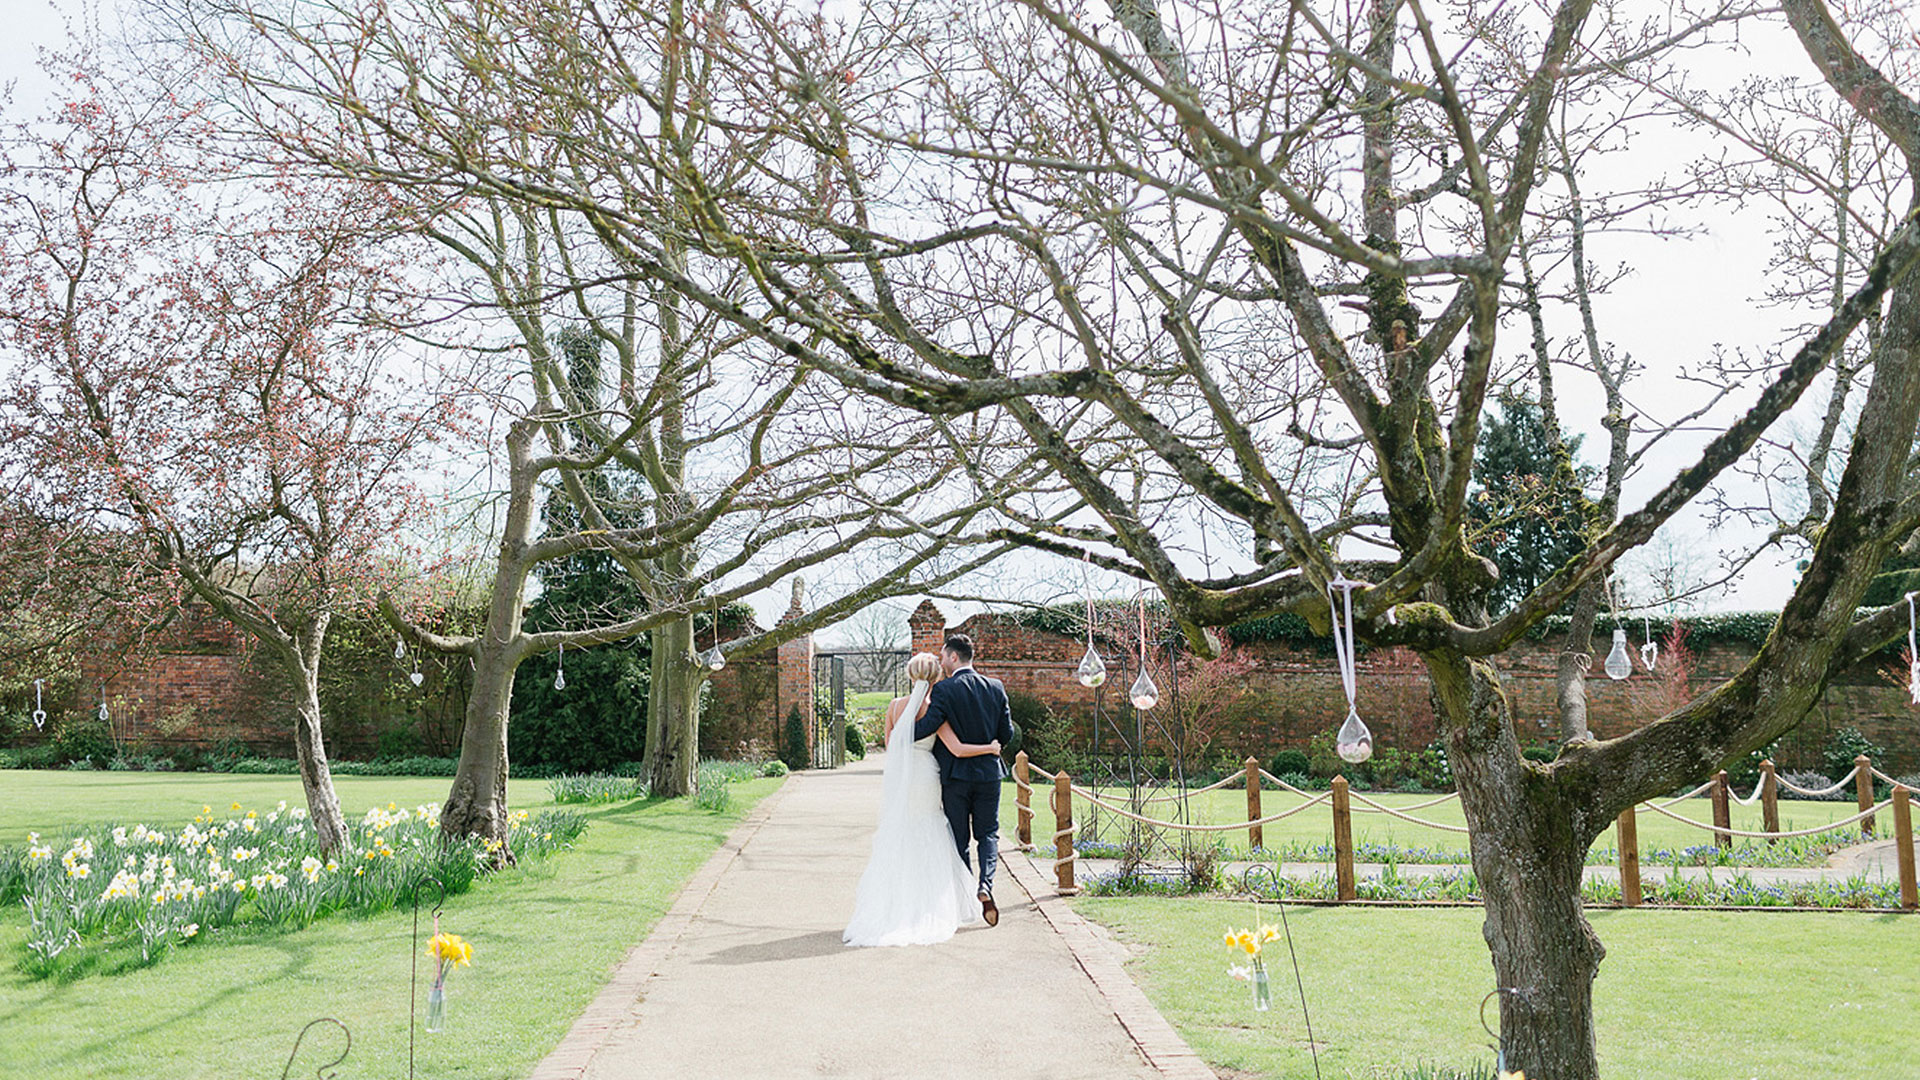 A bride and groom steal a moment in the Walled Garden which has year-round colour - garden weddings